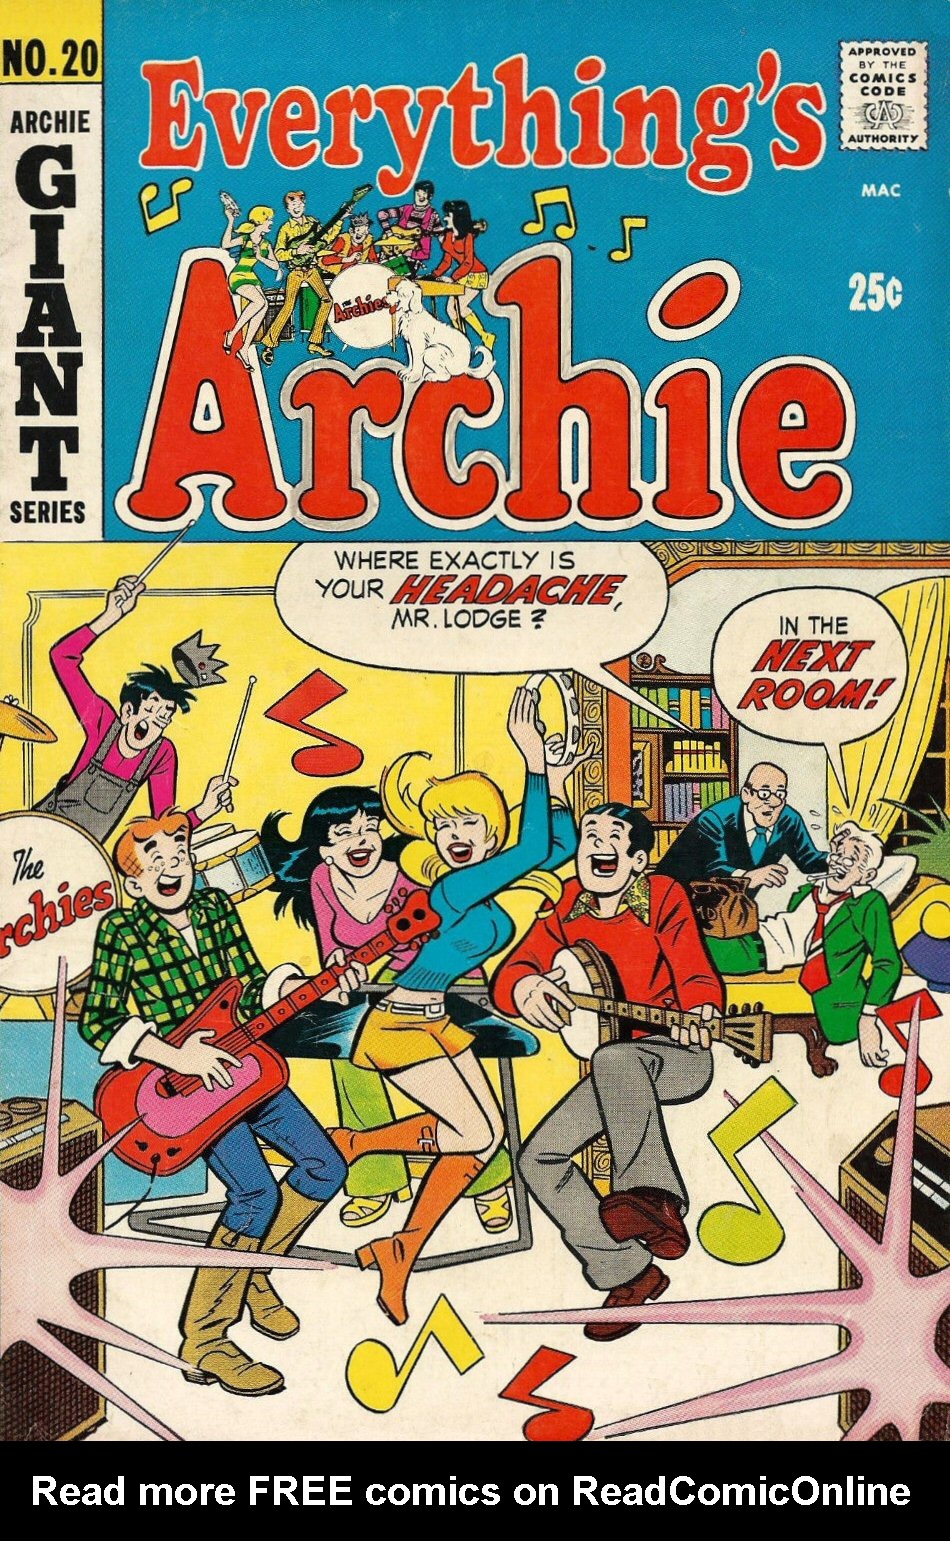 Read online Everything's Archie comic -  Issue #20 - 1